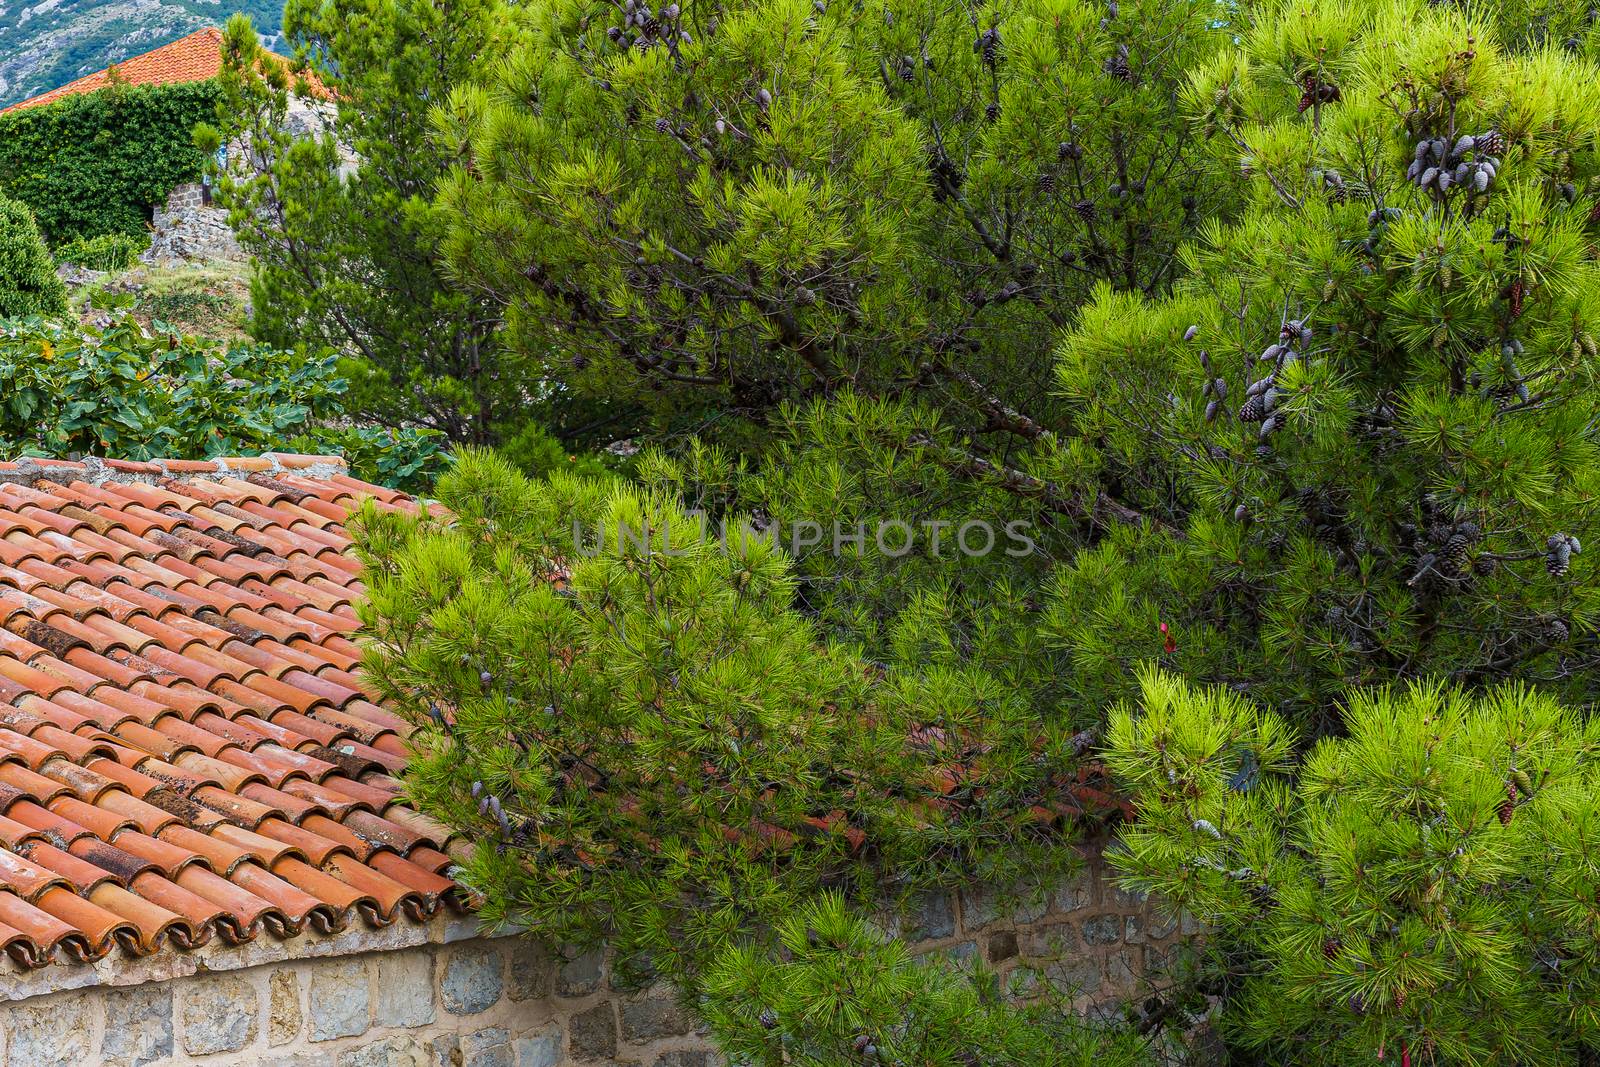 Mediterranean architecture. The roof of the building, covered with red tiles, among the greenery.